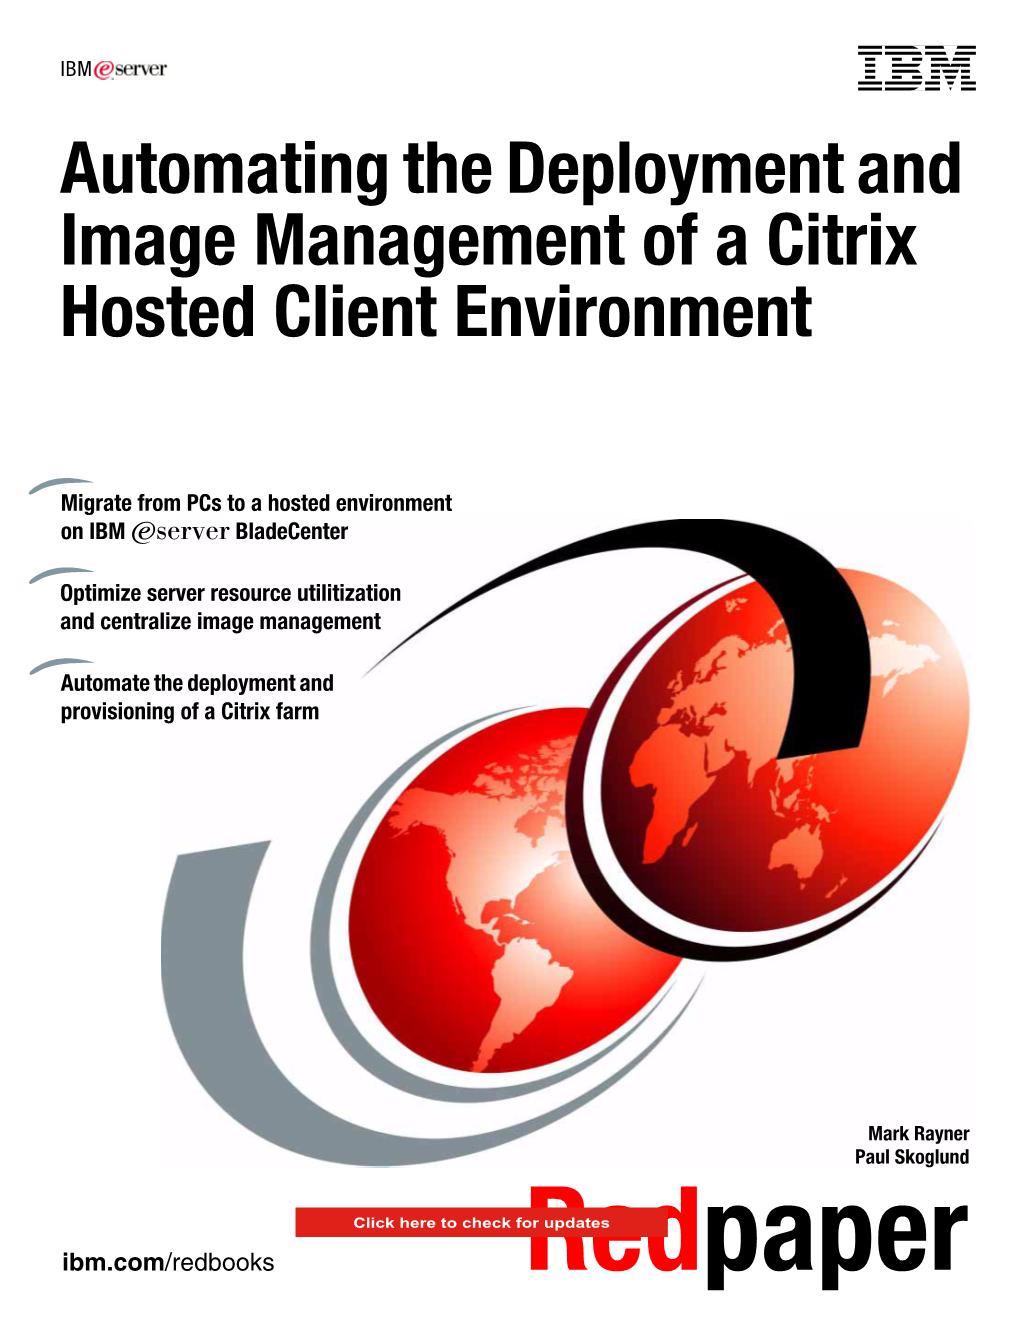 Automating the Deployment and Image Management of a Citrix Hosted Client Environment